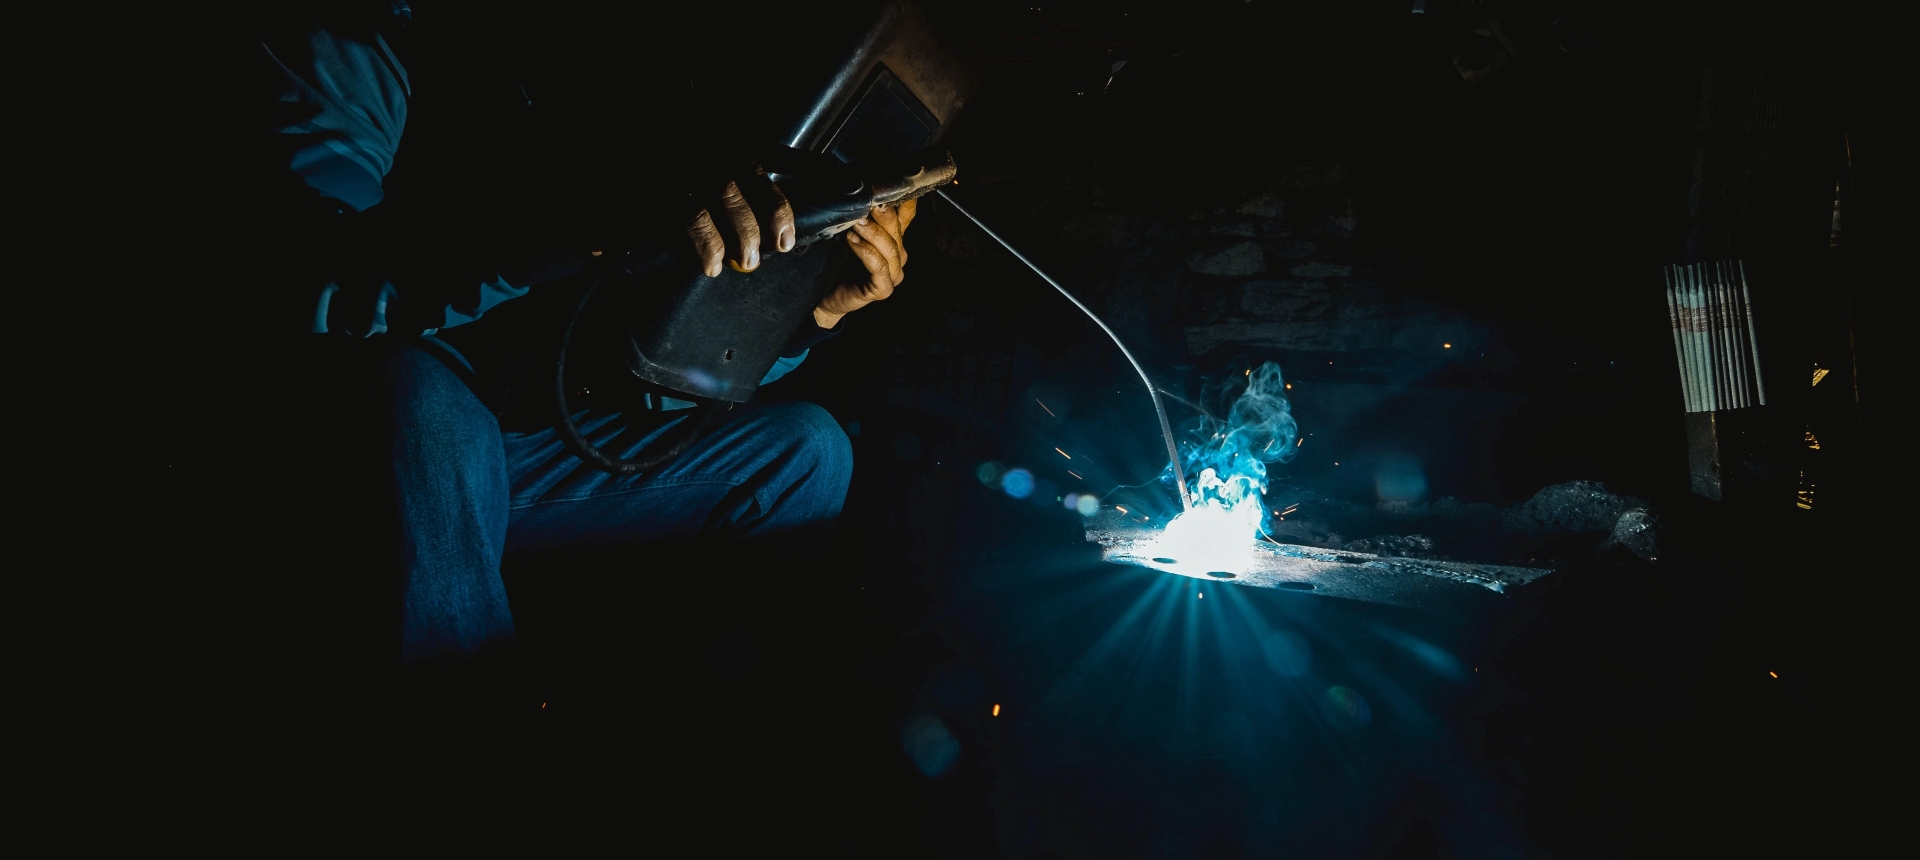 Man welding with a blue flame